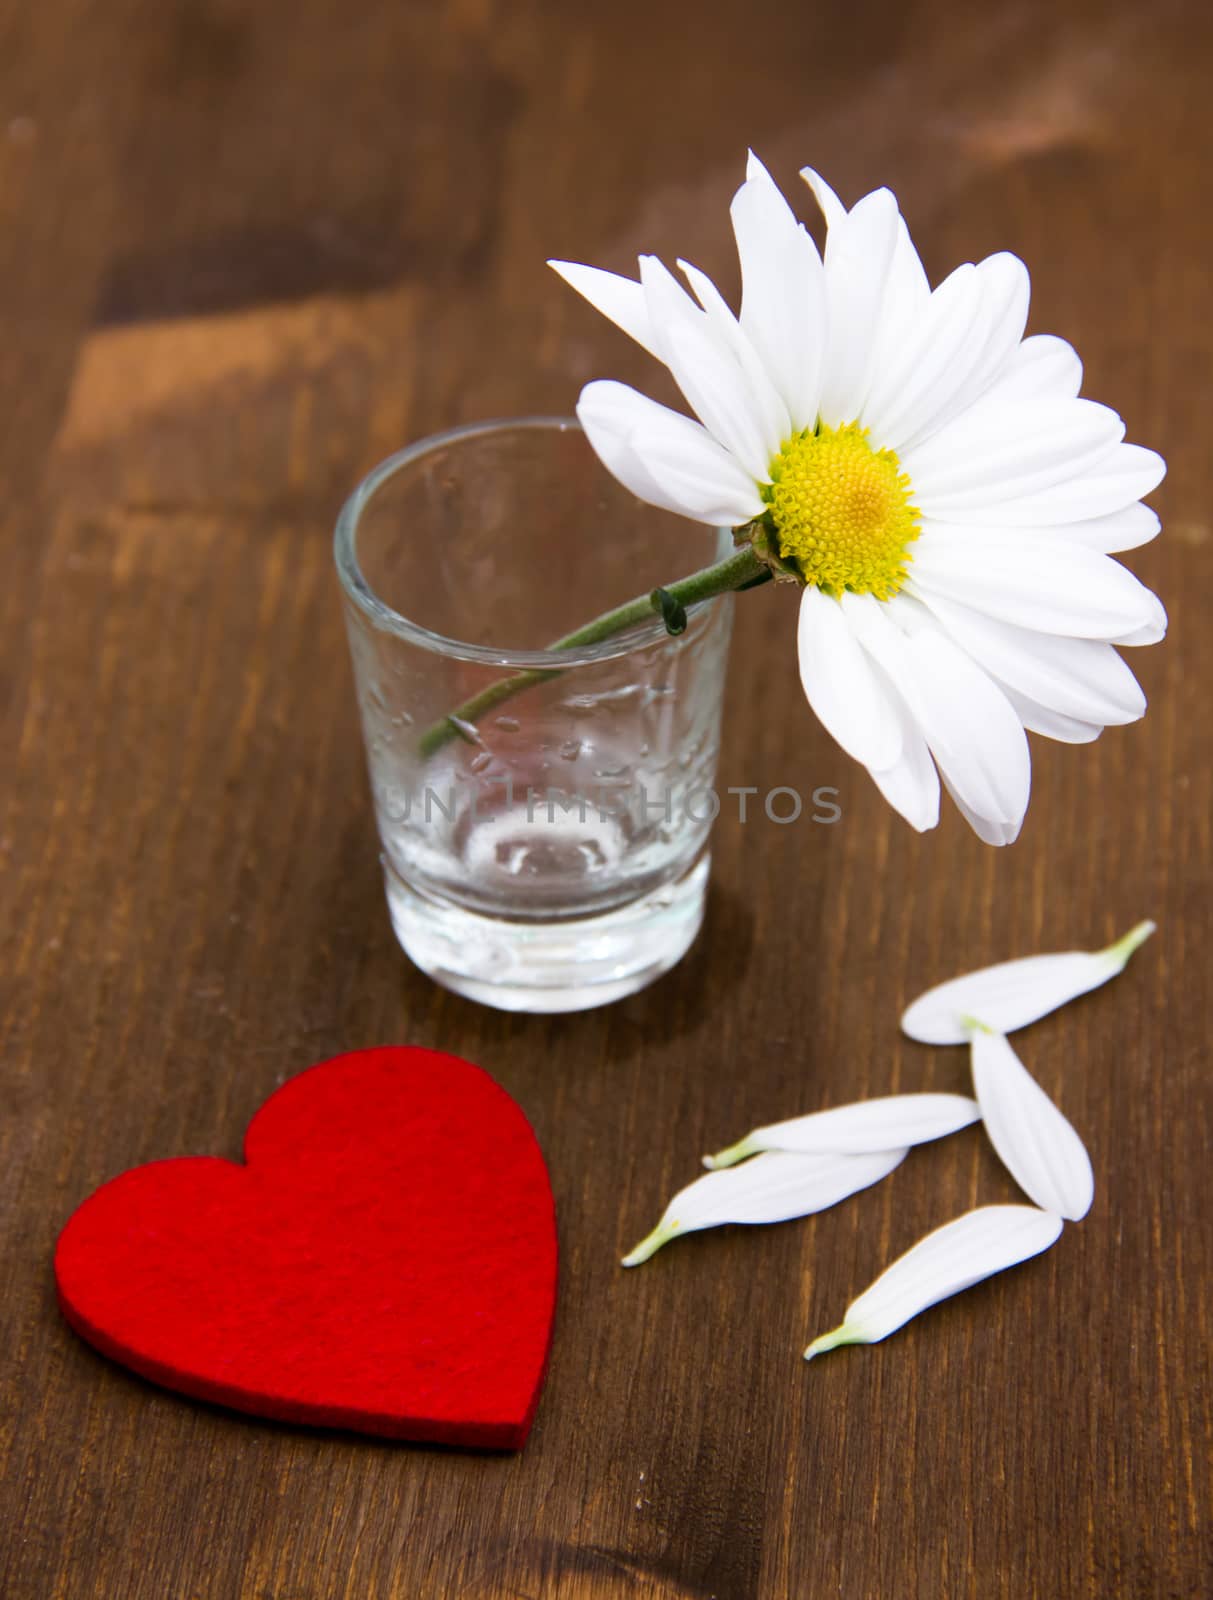 Daisy with little heart on wooden table